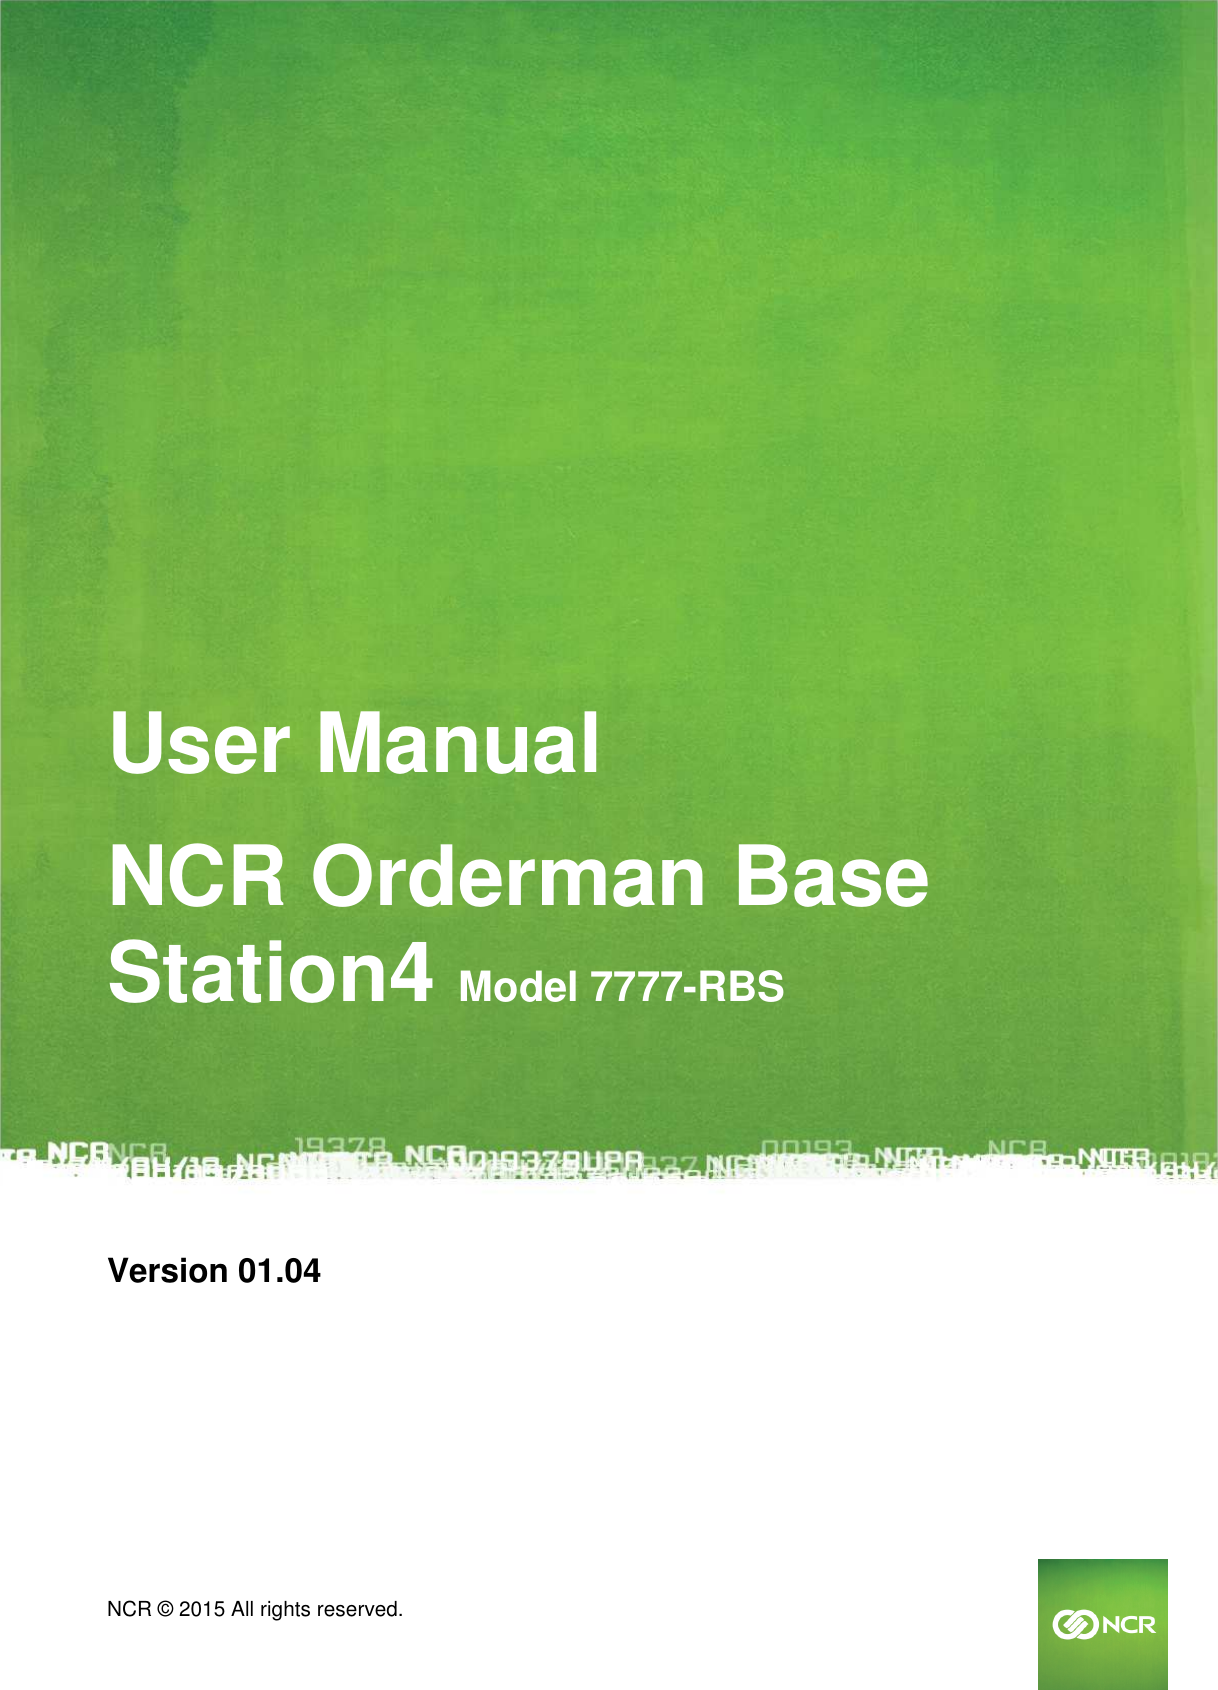  NCR © 2015 All rights reserved.        User Manual NCR Orderman Base Station4 Model 7777-RBS     Version 01.04   